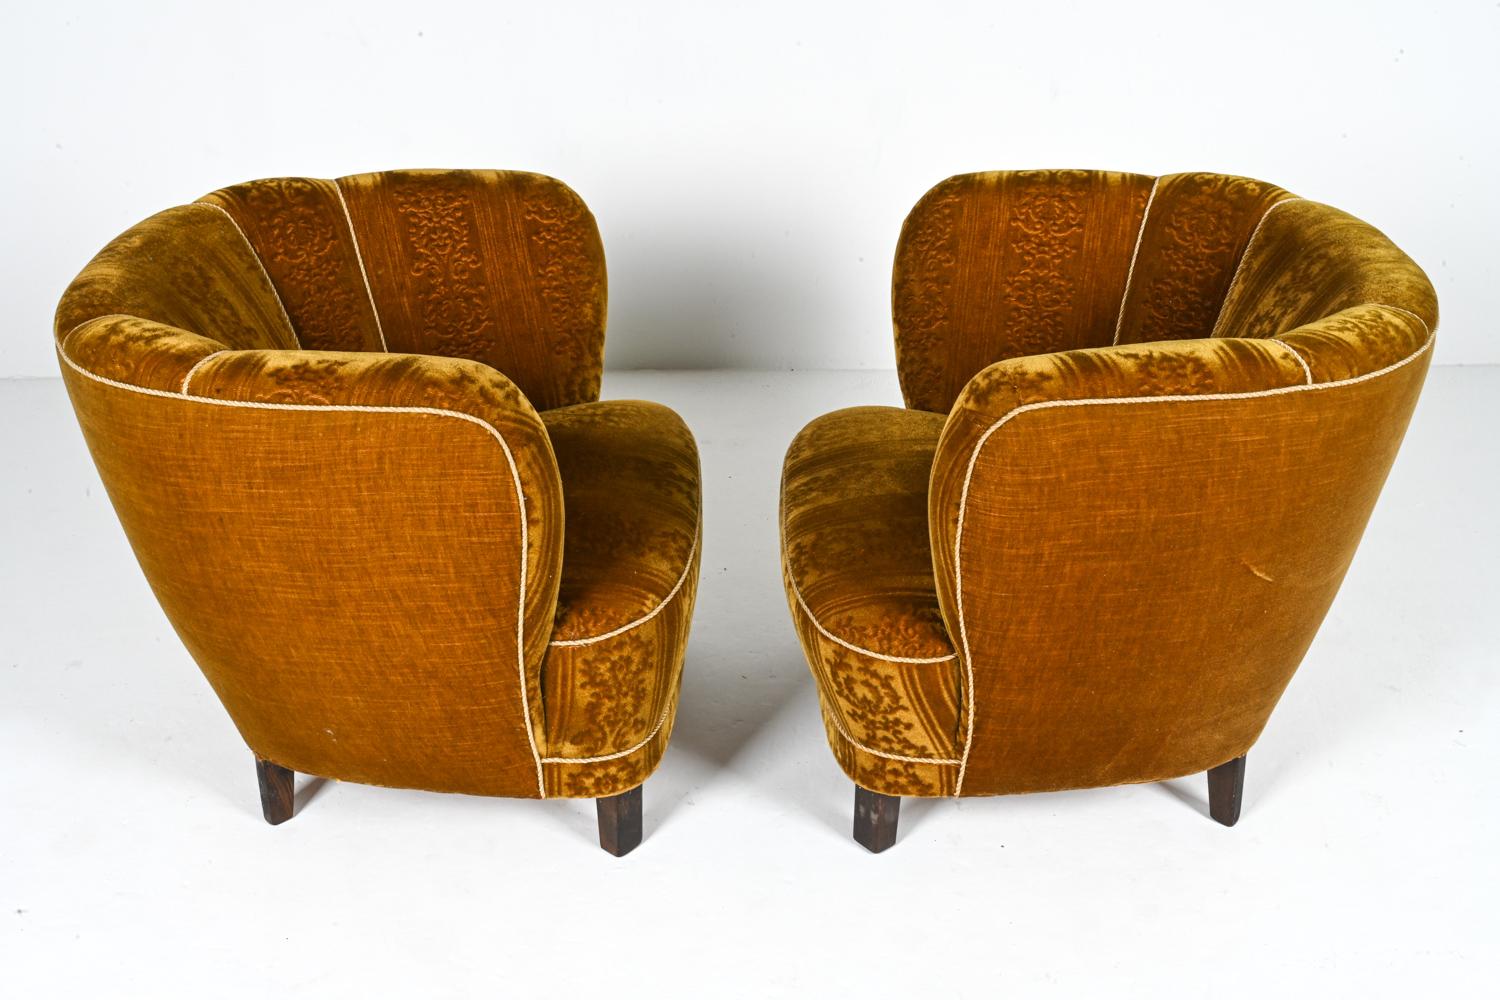 Pair of Manner of Viggo Boesen Lounge Chairs by Slagelse, c. 1940's For Sale 8